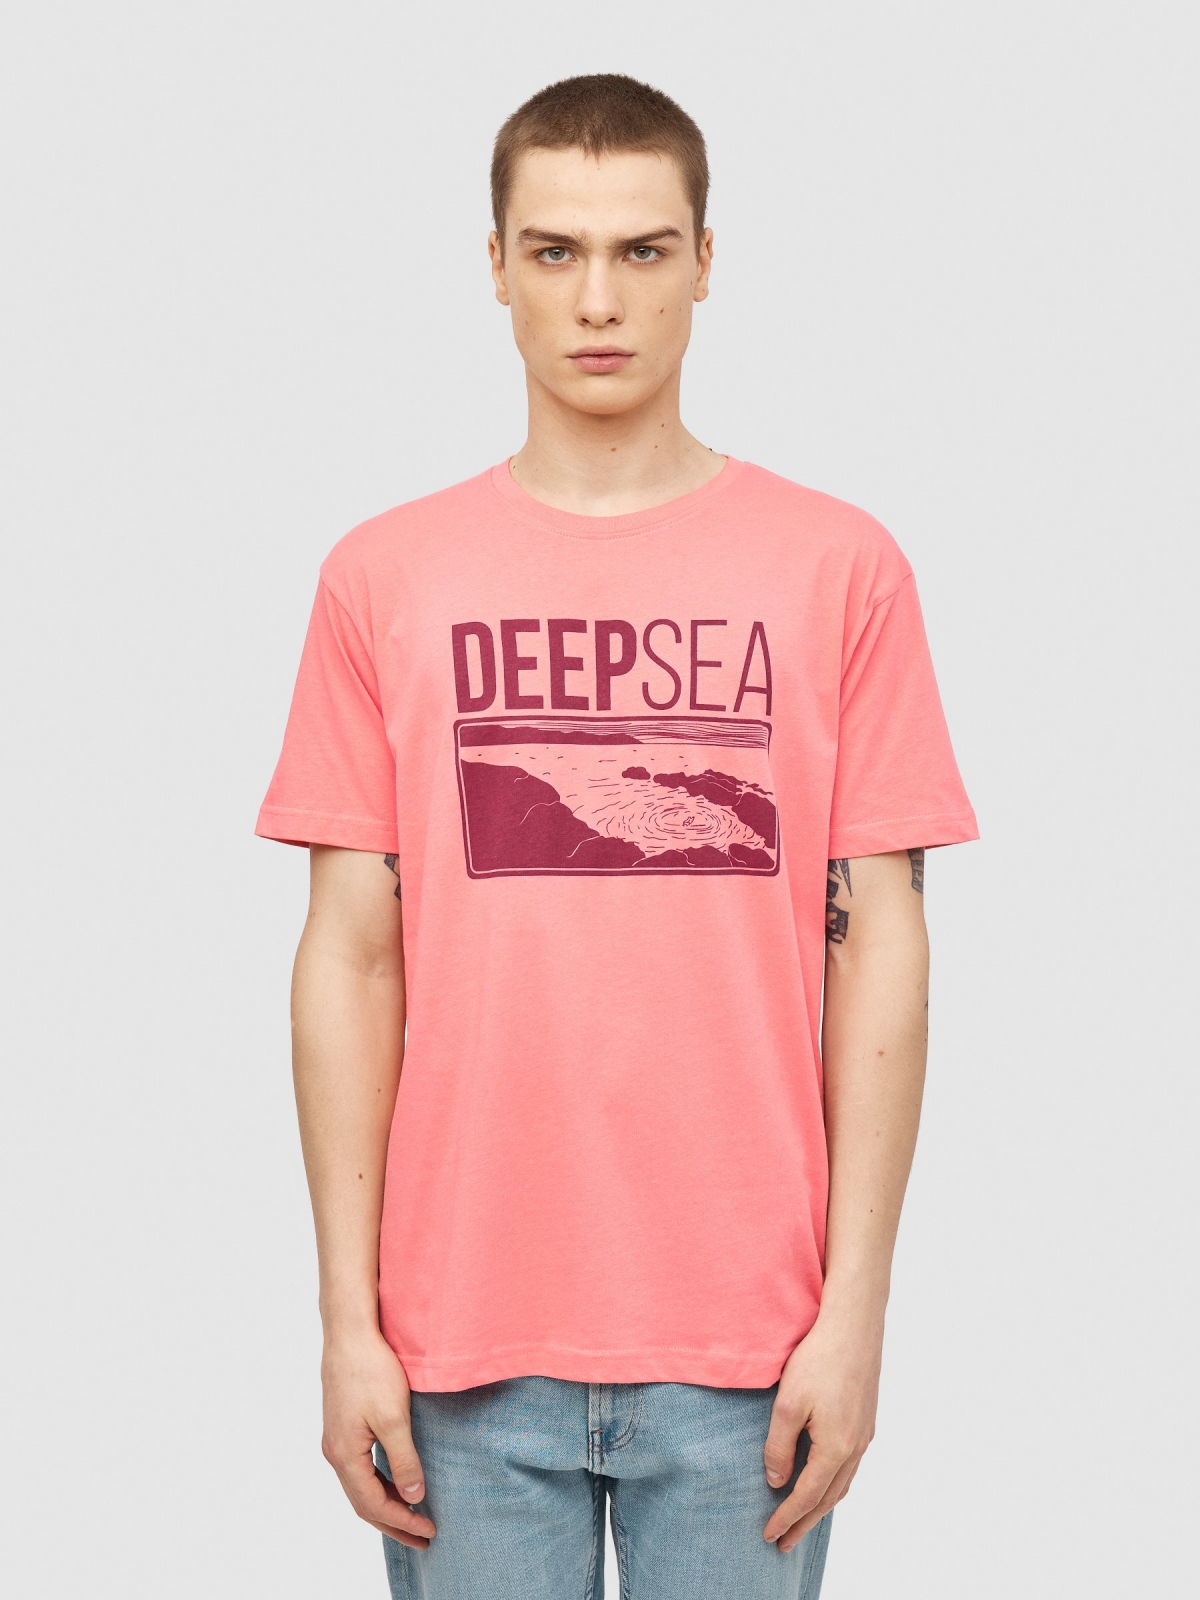 Deep Sea t-shirt pink middle front view